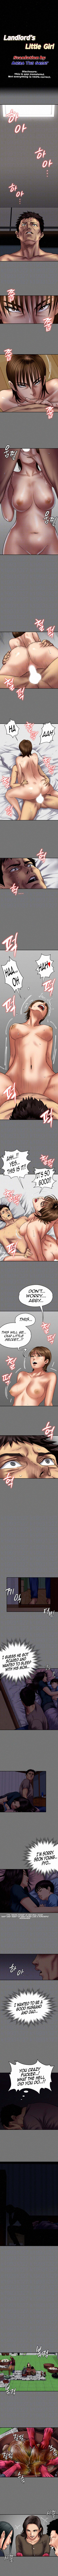 Panel Image 1 for chapter 79 of manhwa Queen Bee on read.oppai.stream